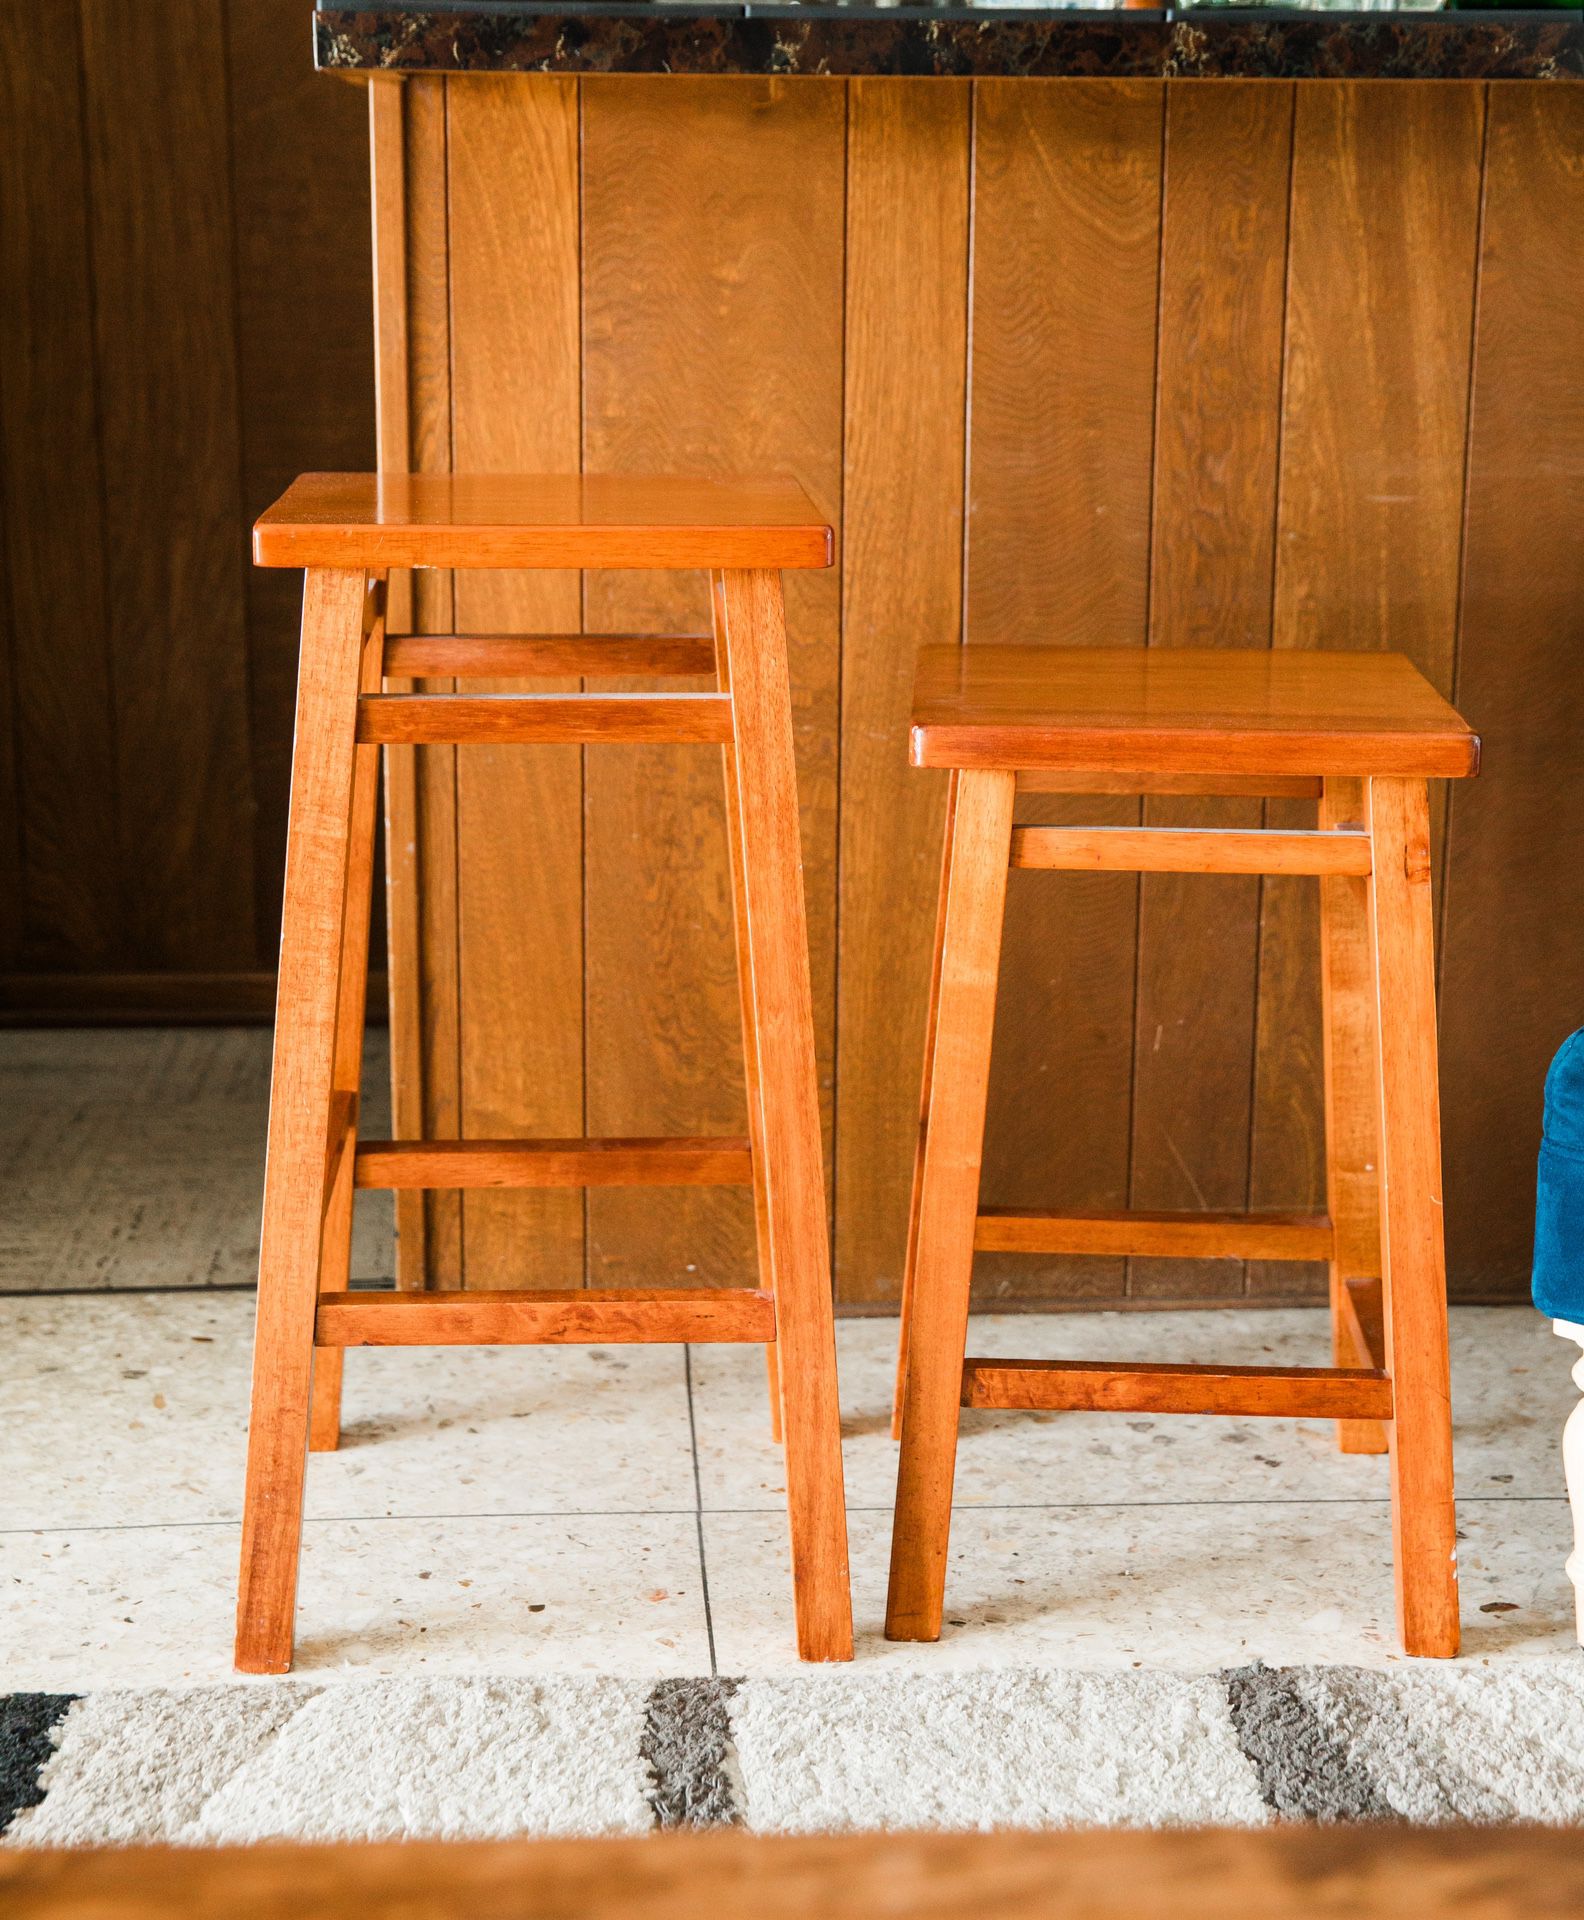 Two Wooden Bar Stools (24” and 29”) 